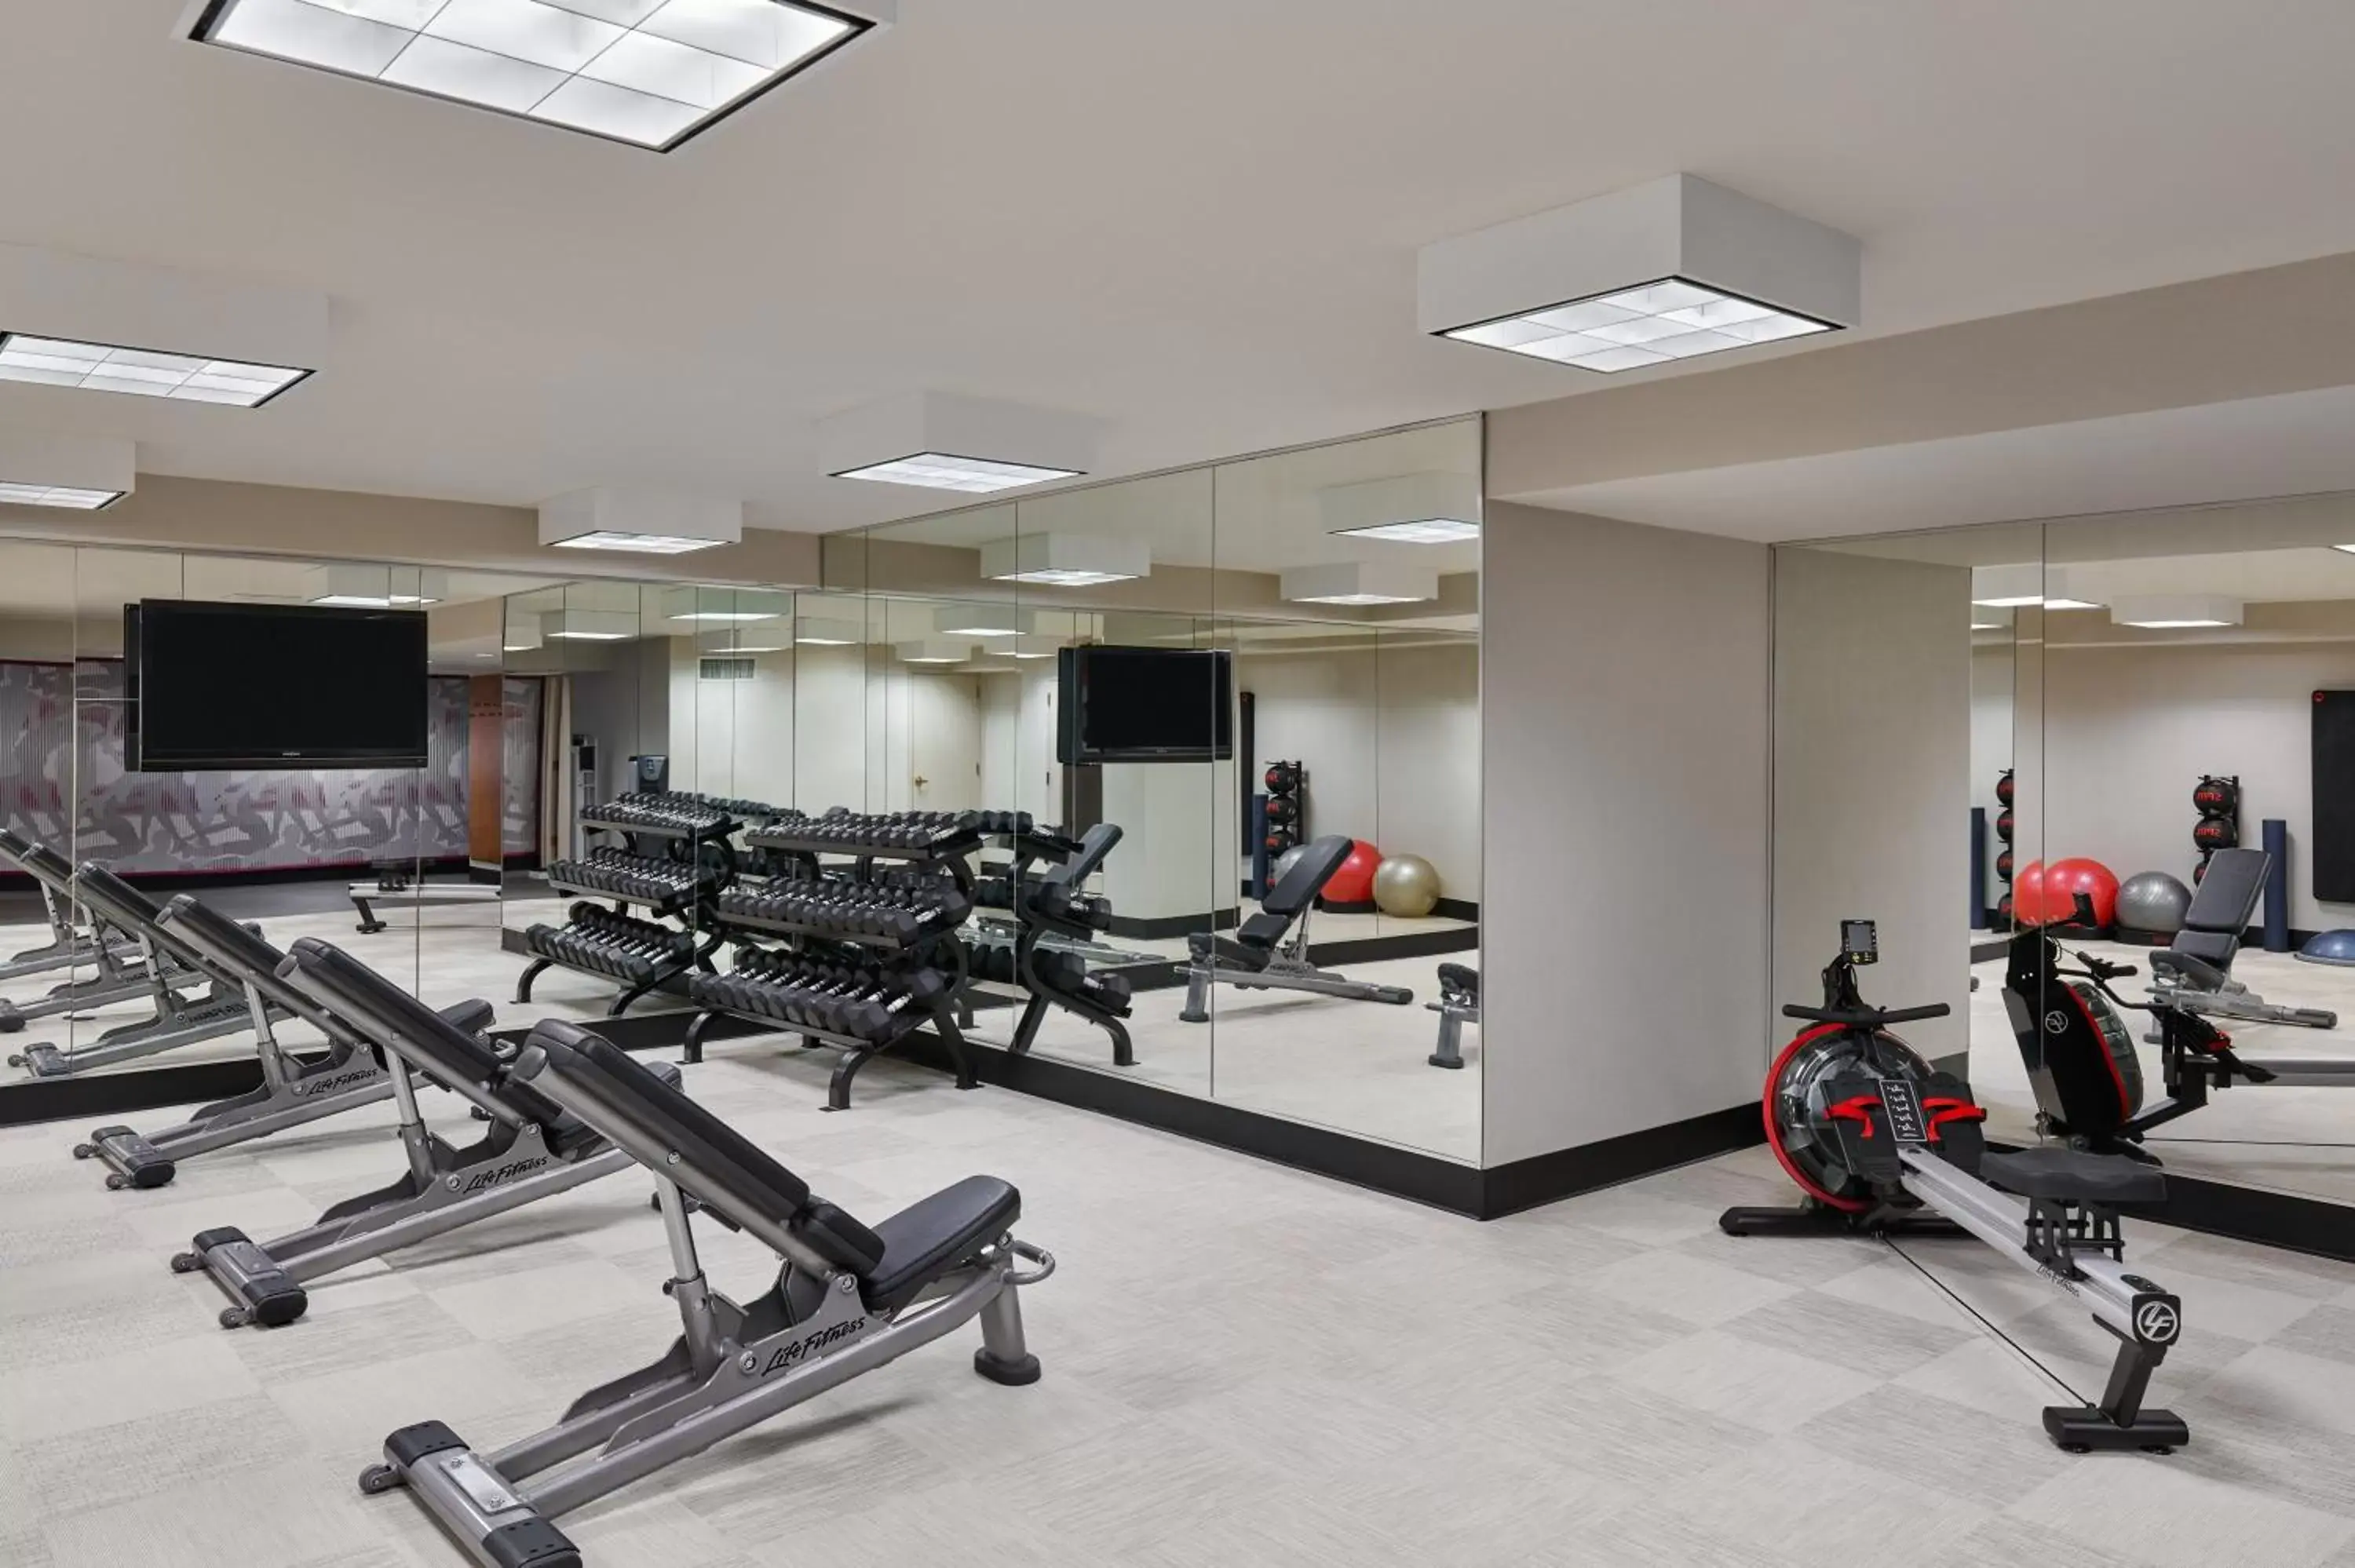 Fitness centre/facilities, Fitness Center/Facilities in Astor Crowne Plaza New Orleans French Quarter, Corner of Bourbon and Canal